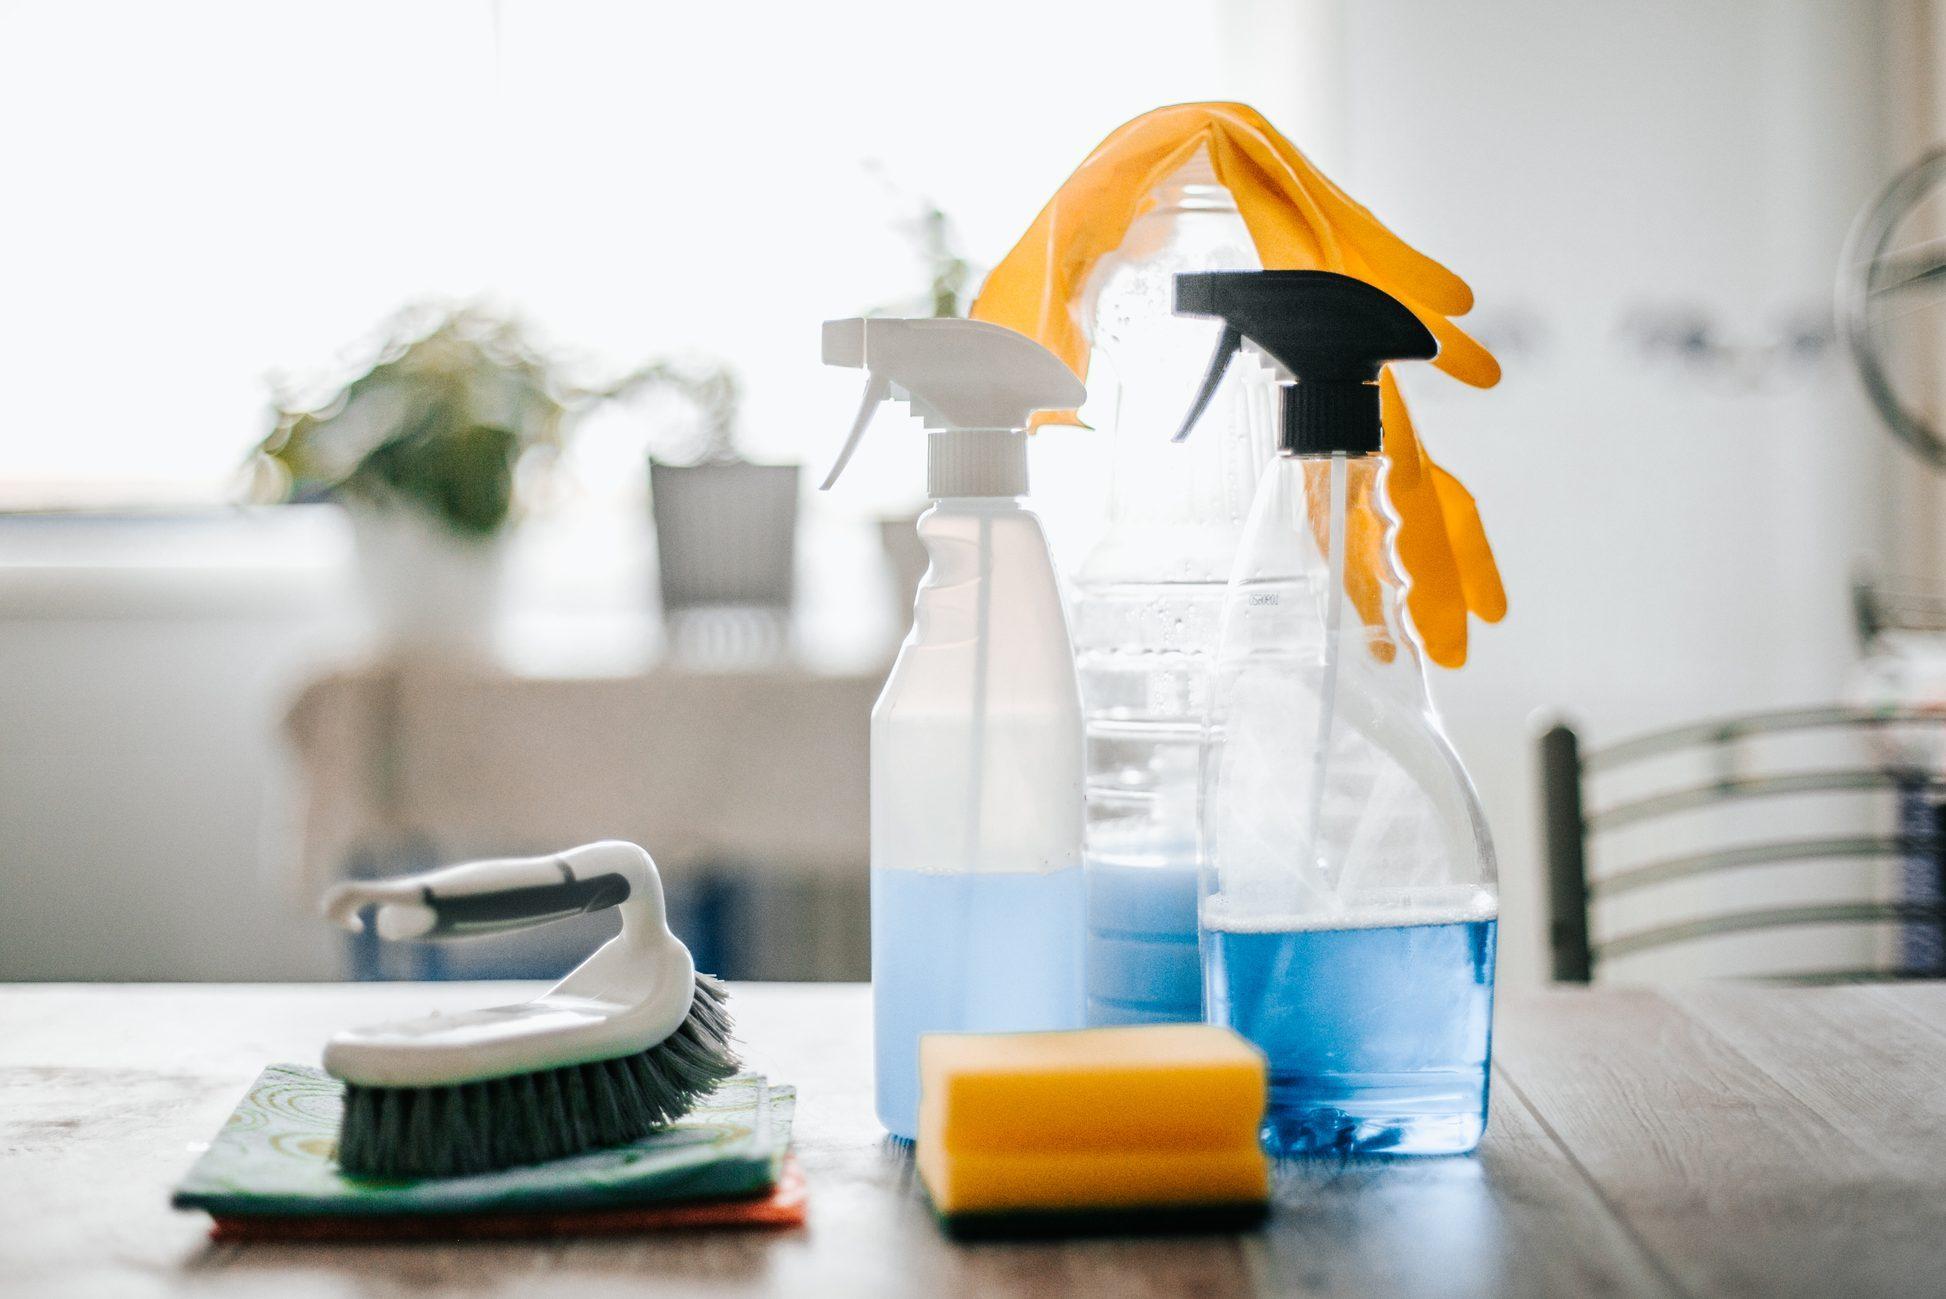 20 Ways to Organize Your Cleaning Supplies Properly